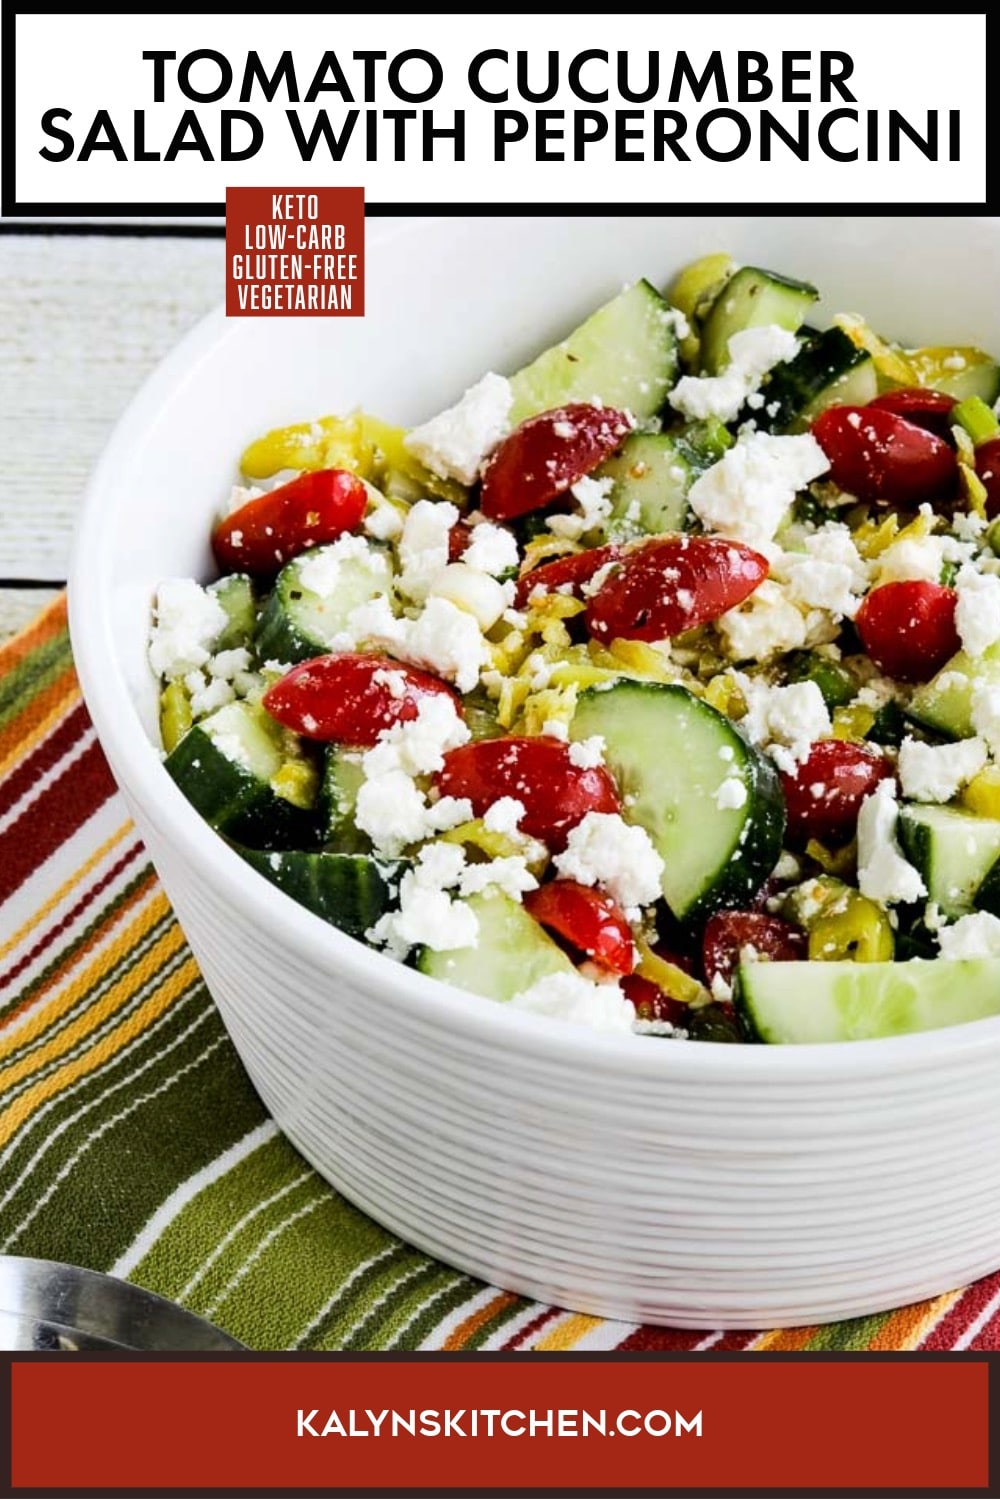 Pinterest image of Tomato Cucumber Salad with Peperoncini